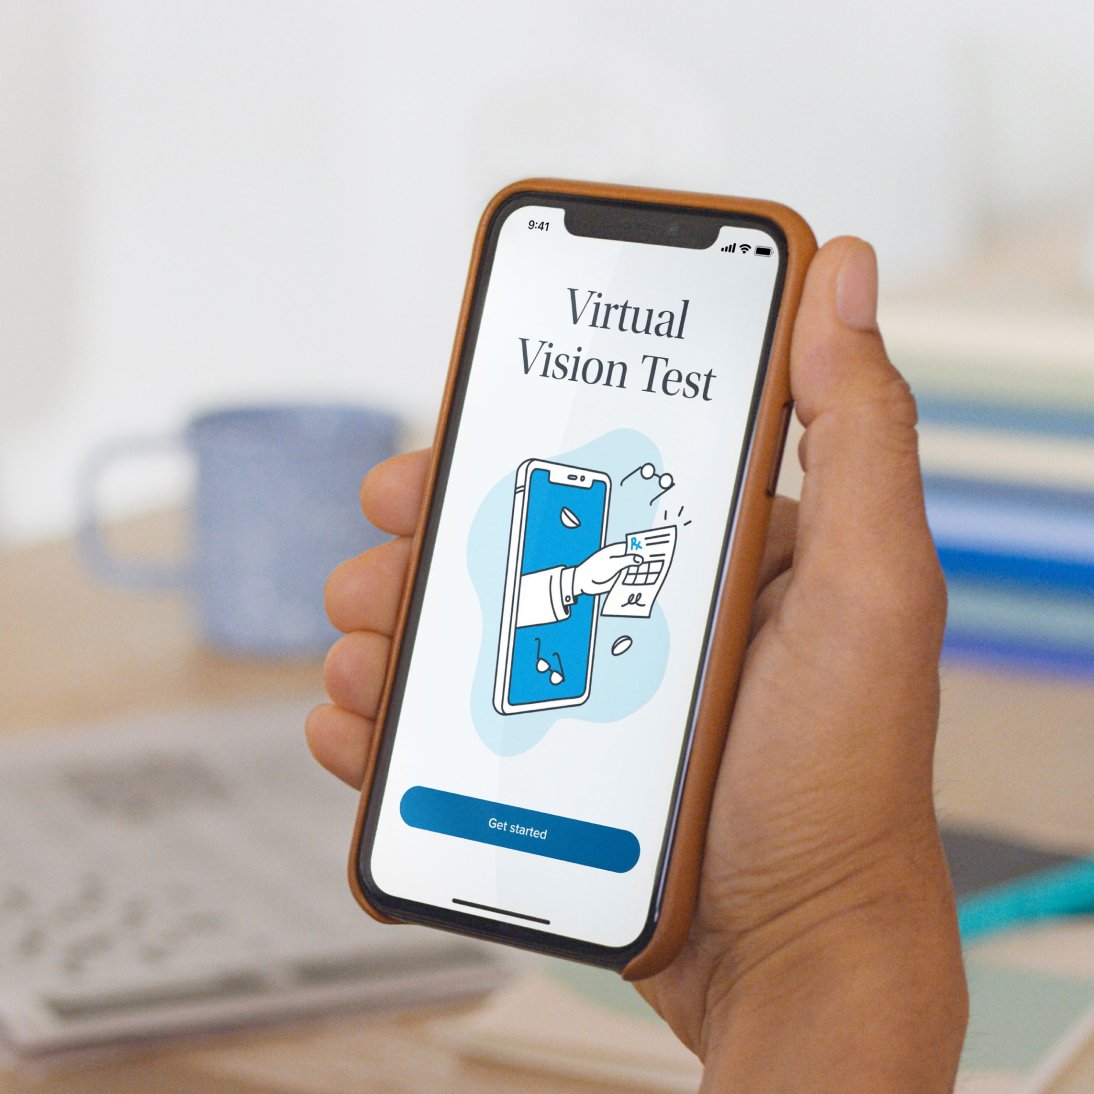 Virtual vision test displayed on a smartphone